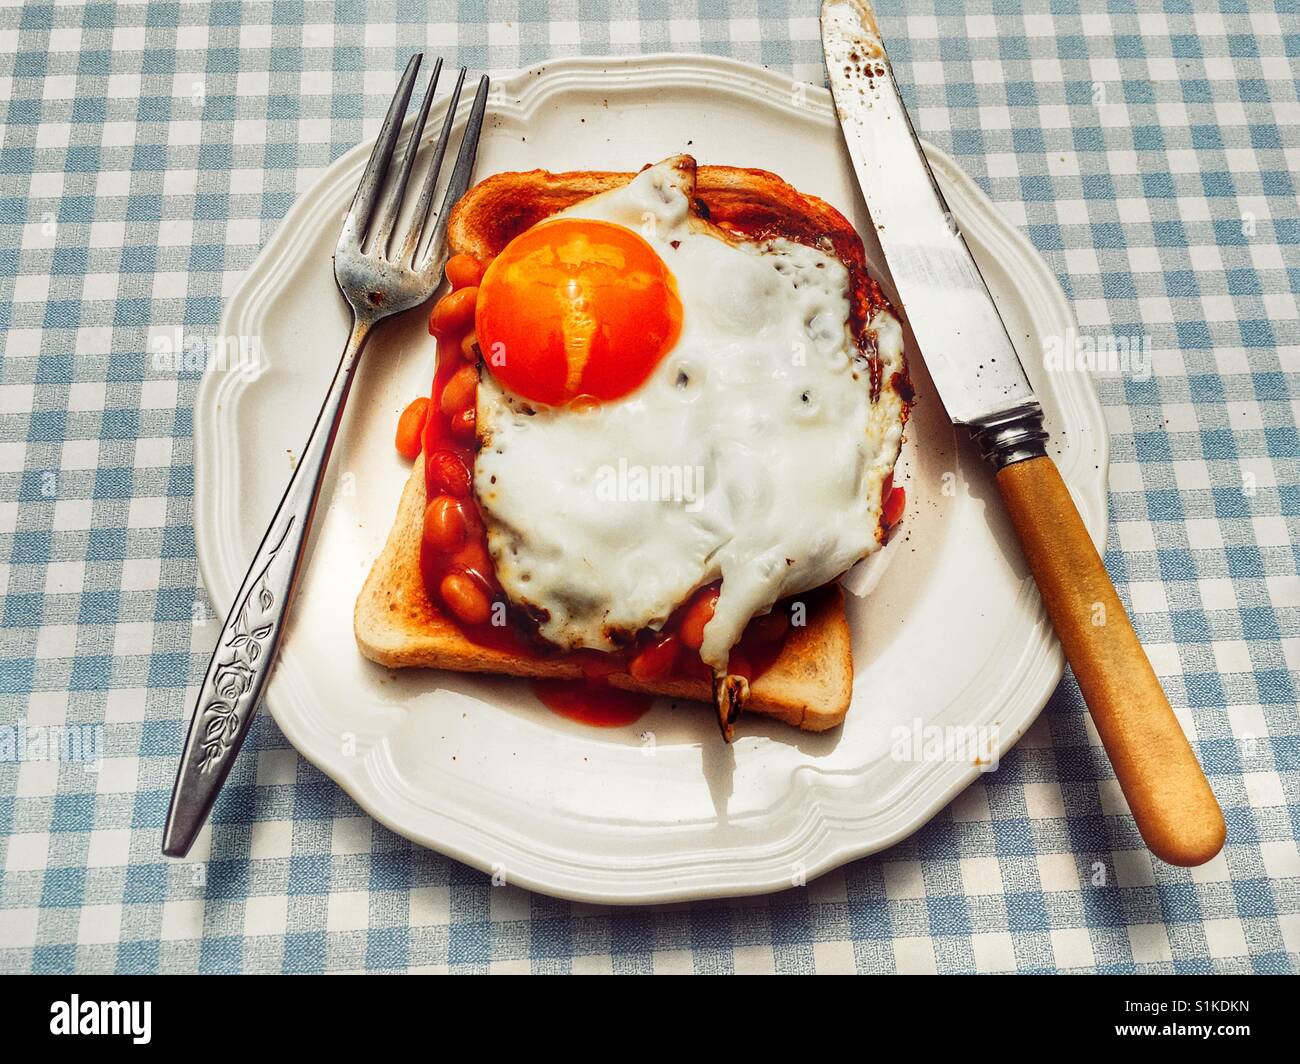 Baked beans and fried egg on toast Stock Photo